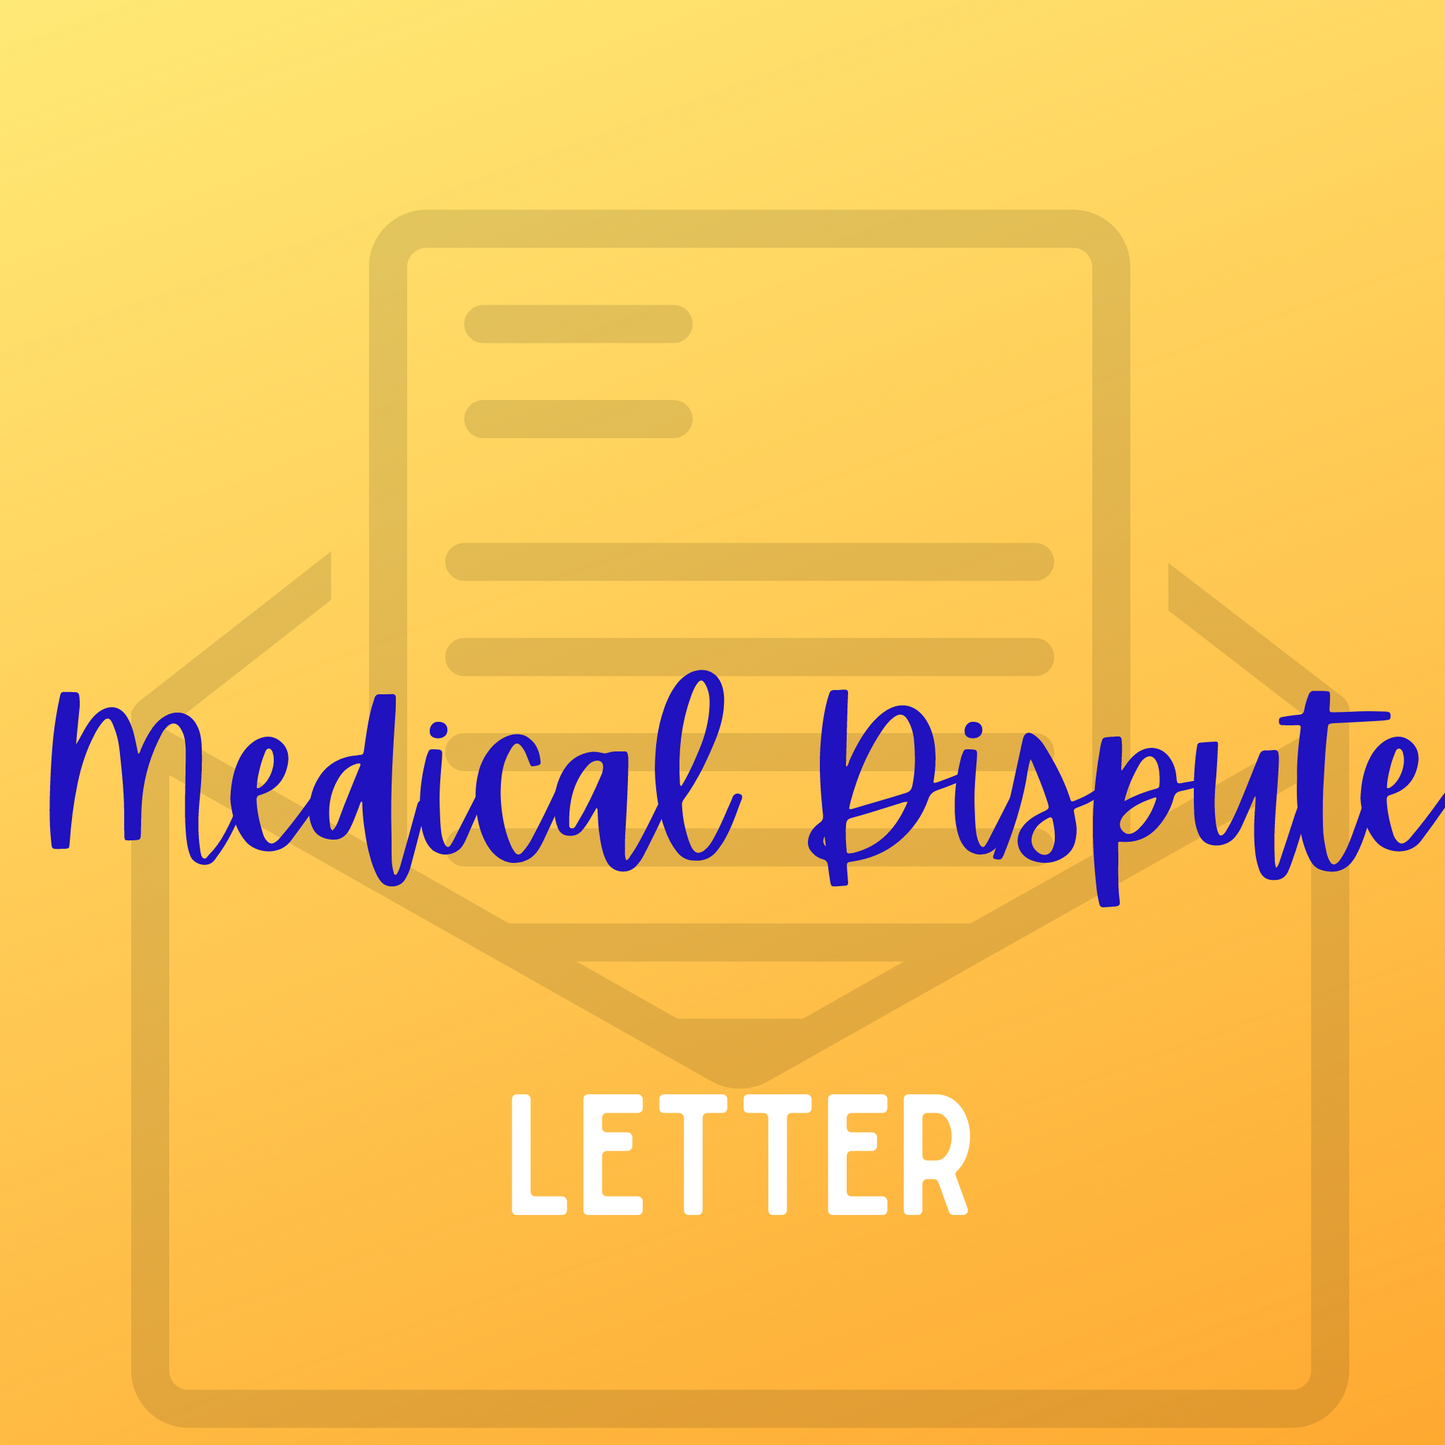 Medical Collection/Bill Removal Letter